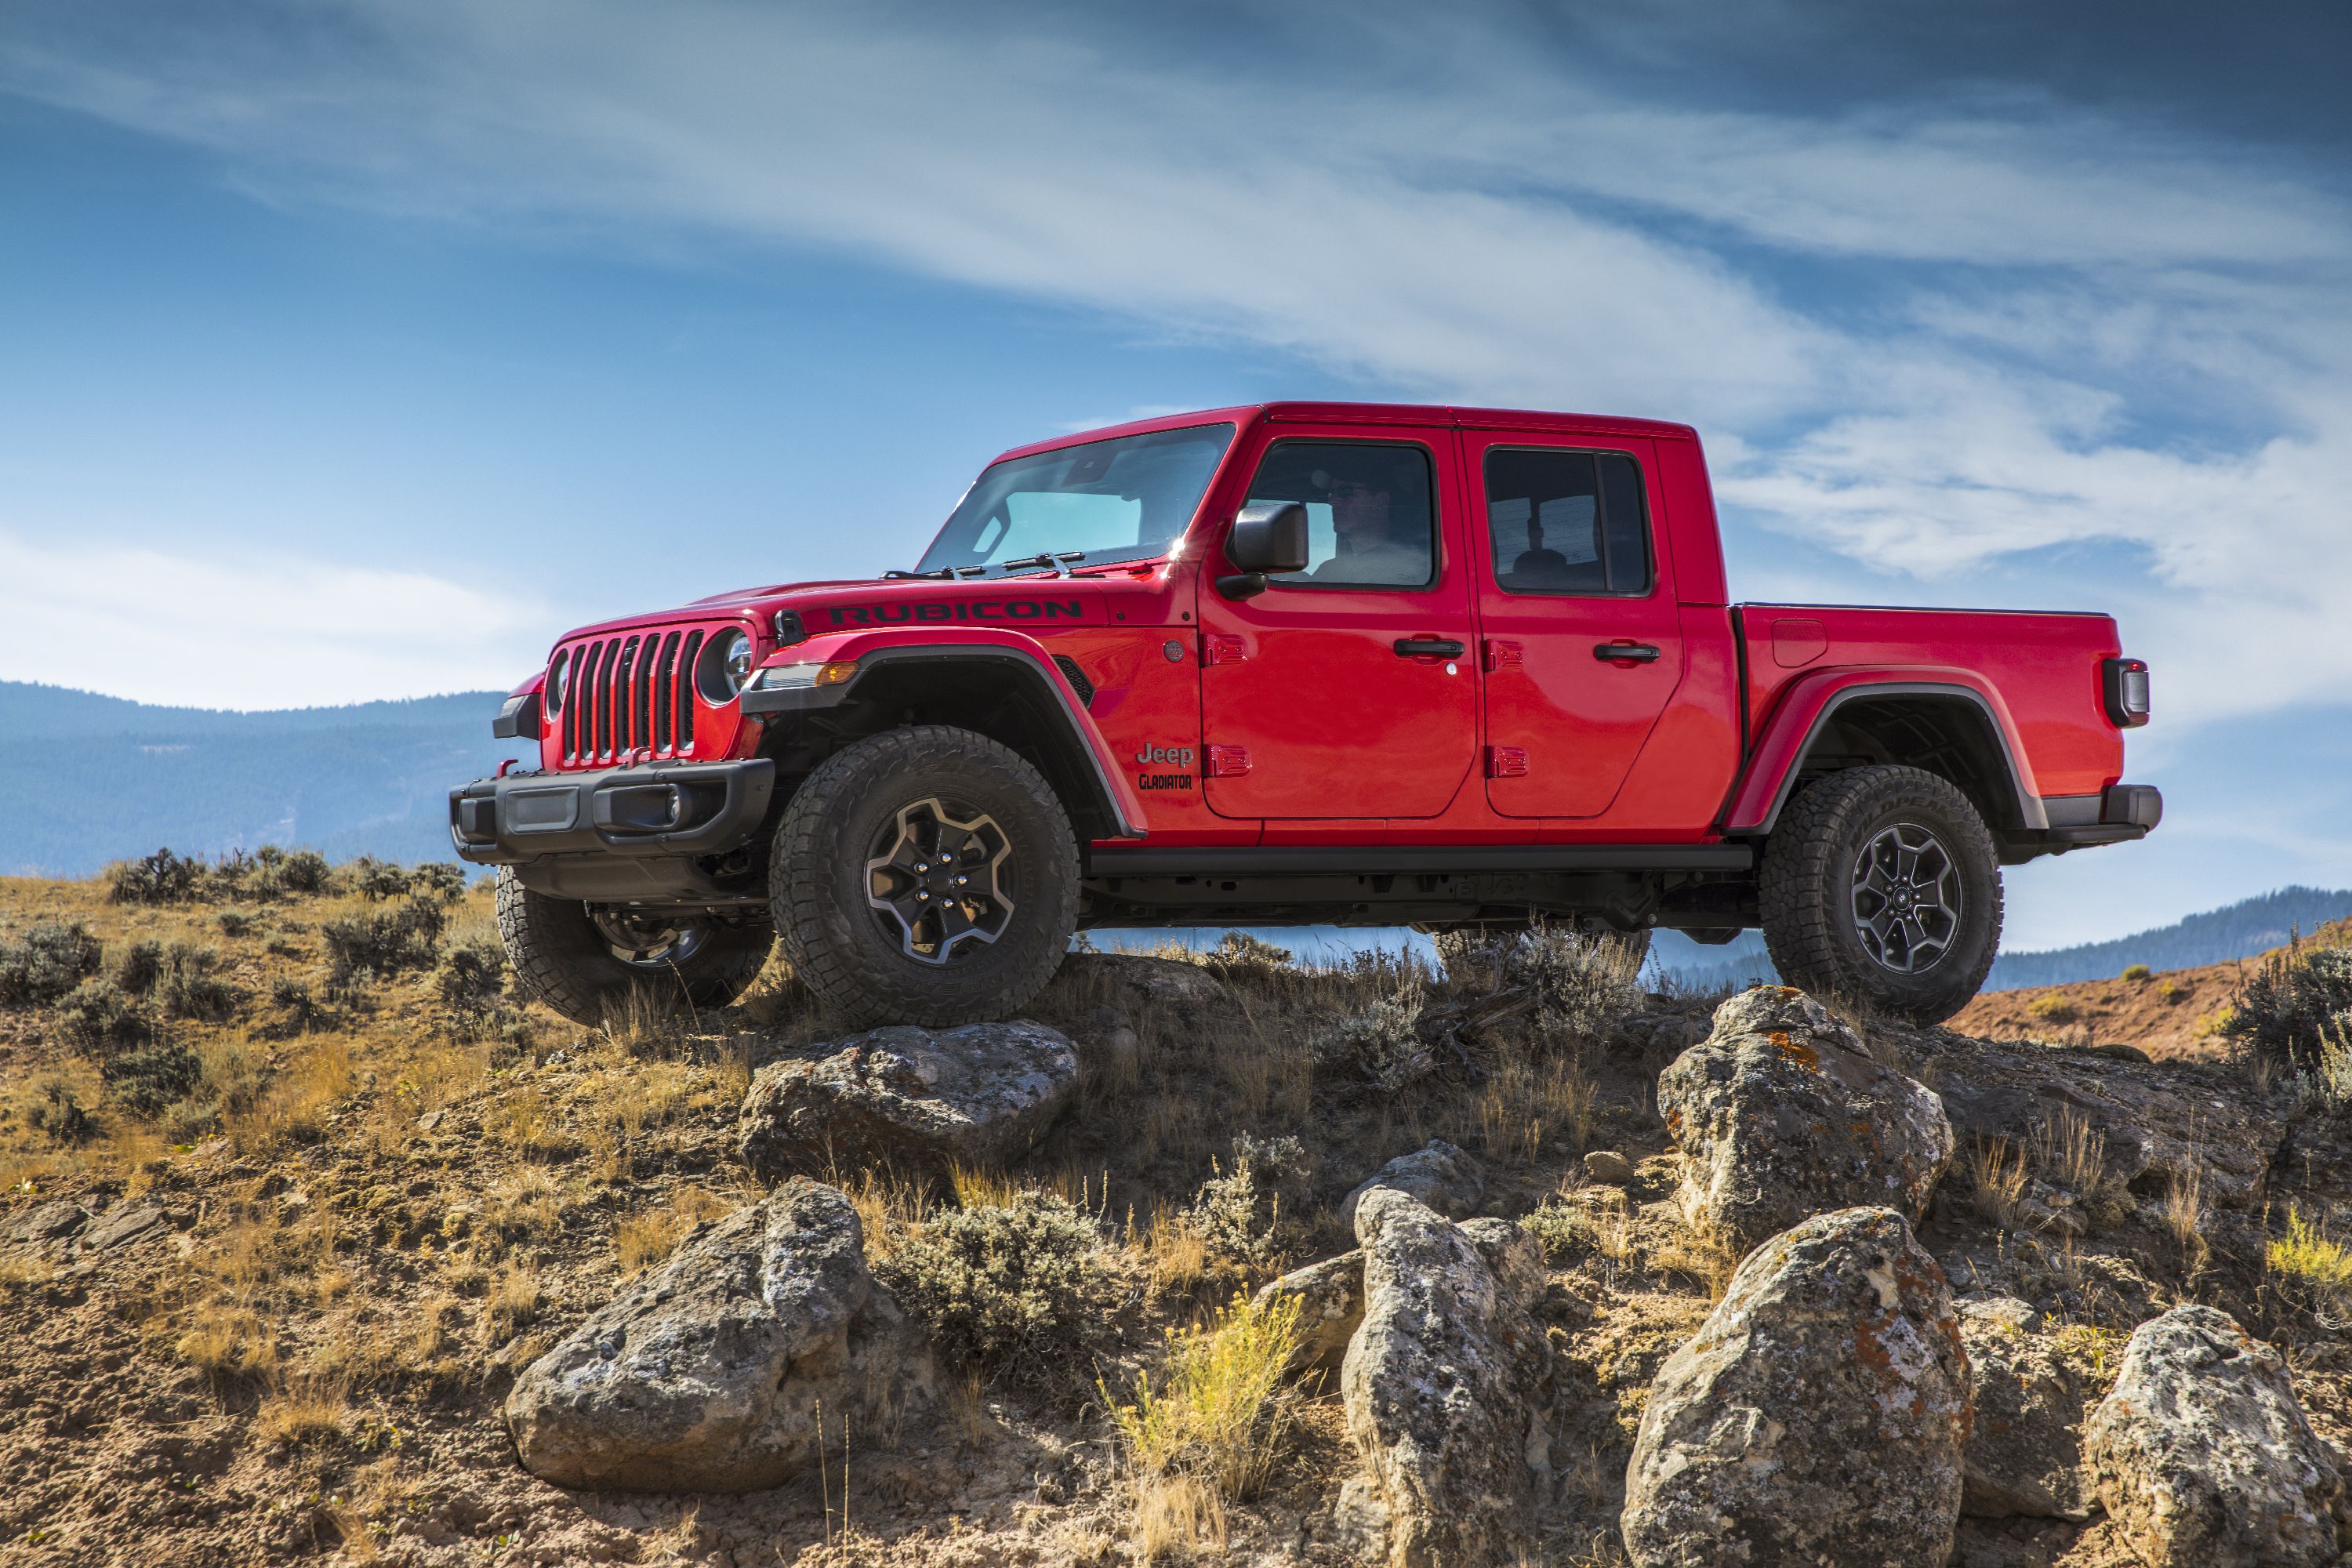 2021 Jeep Gladiator Adds Diesel Engine with 442 LB-FT of Torque